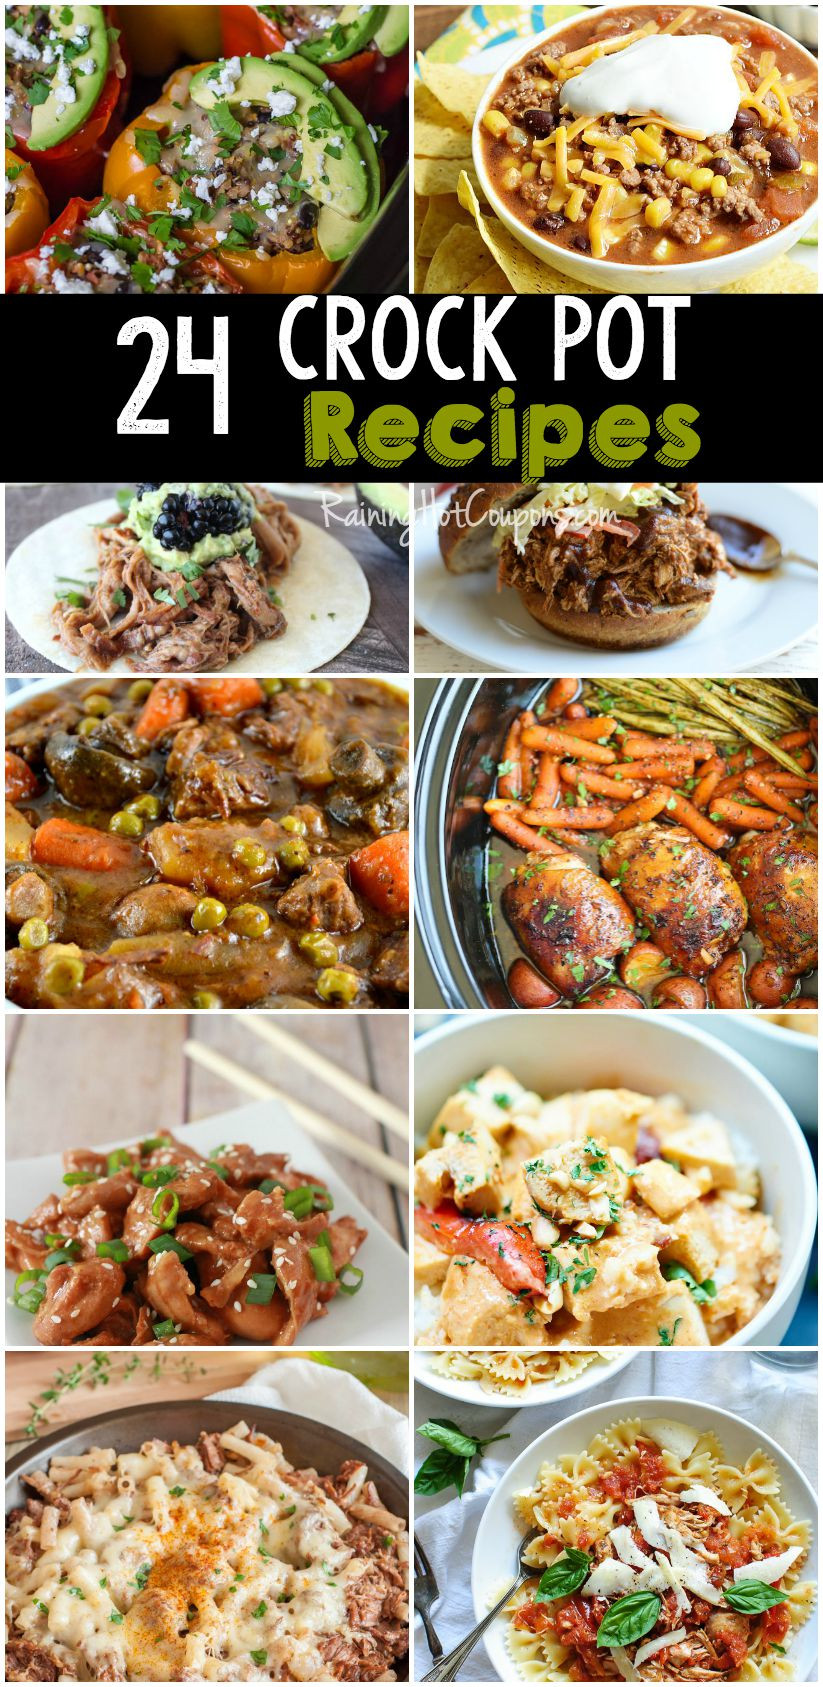 The 35 Best Ideas for Crockpot Dinner Recipes - Best Recipes Ideas and ...